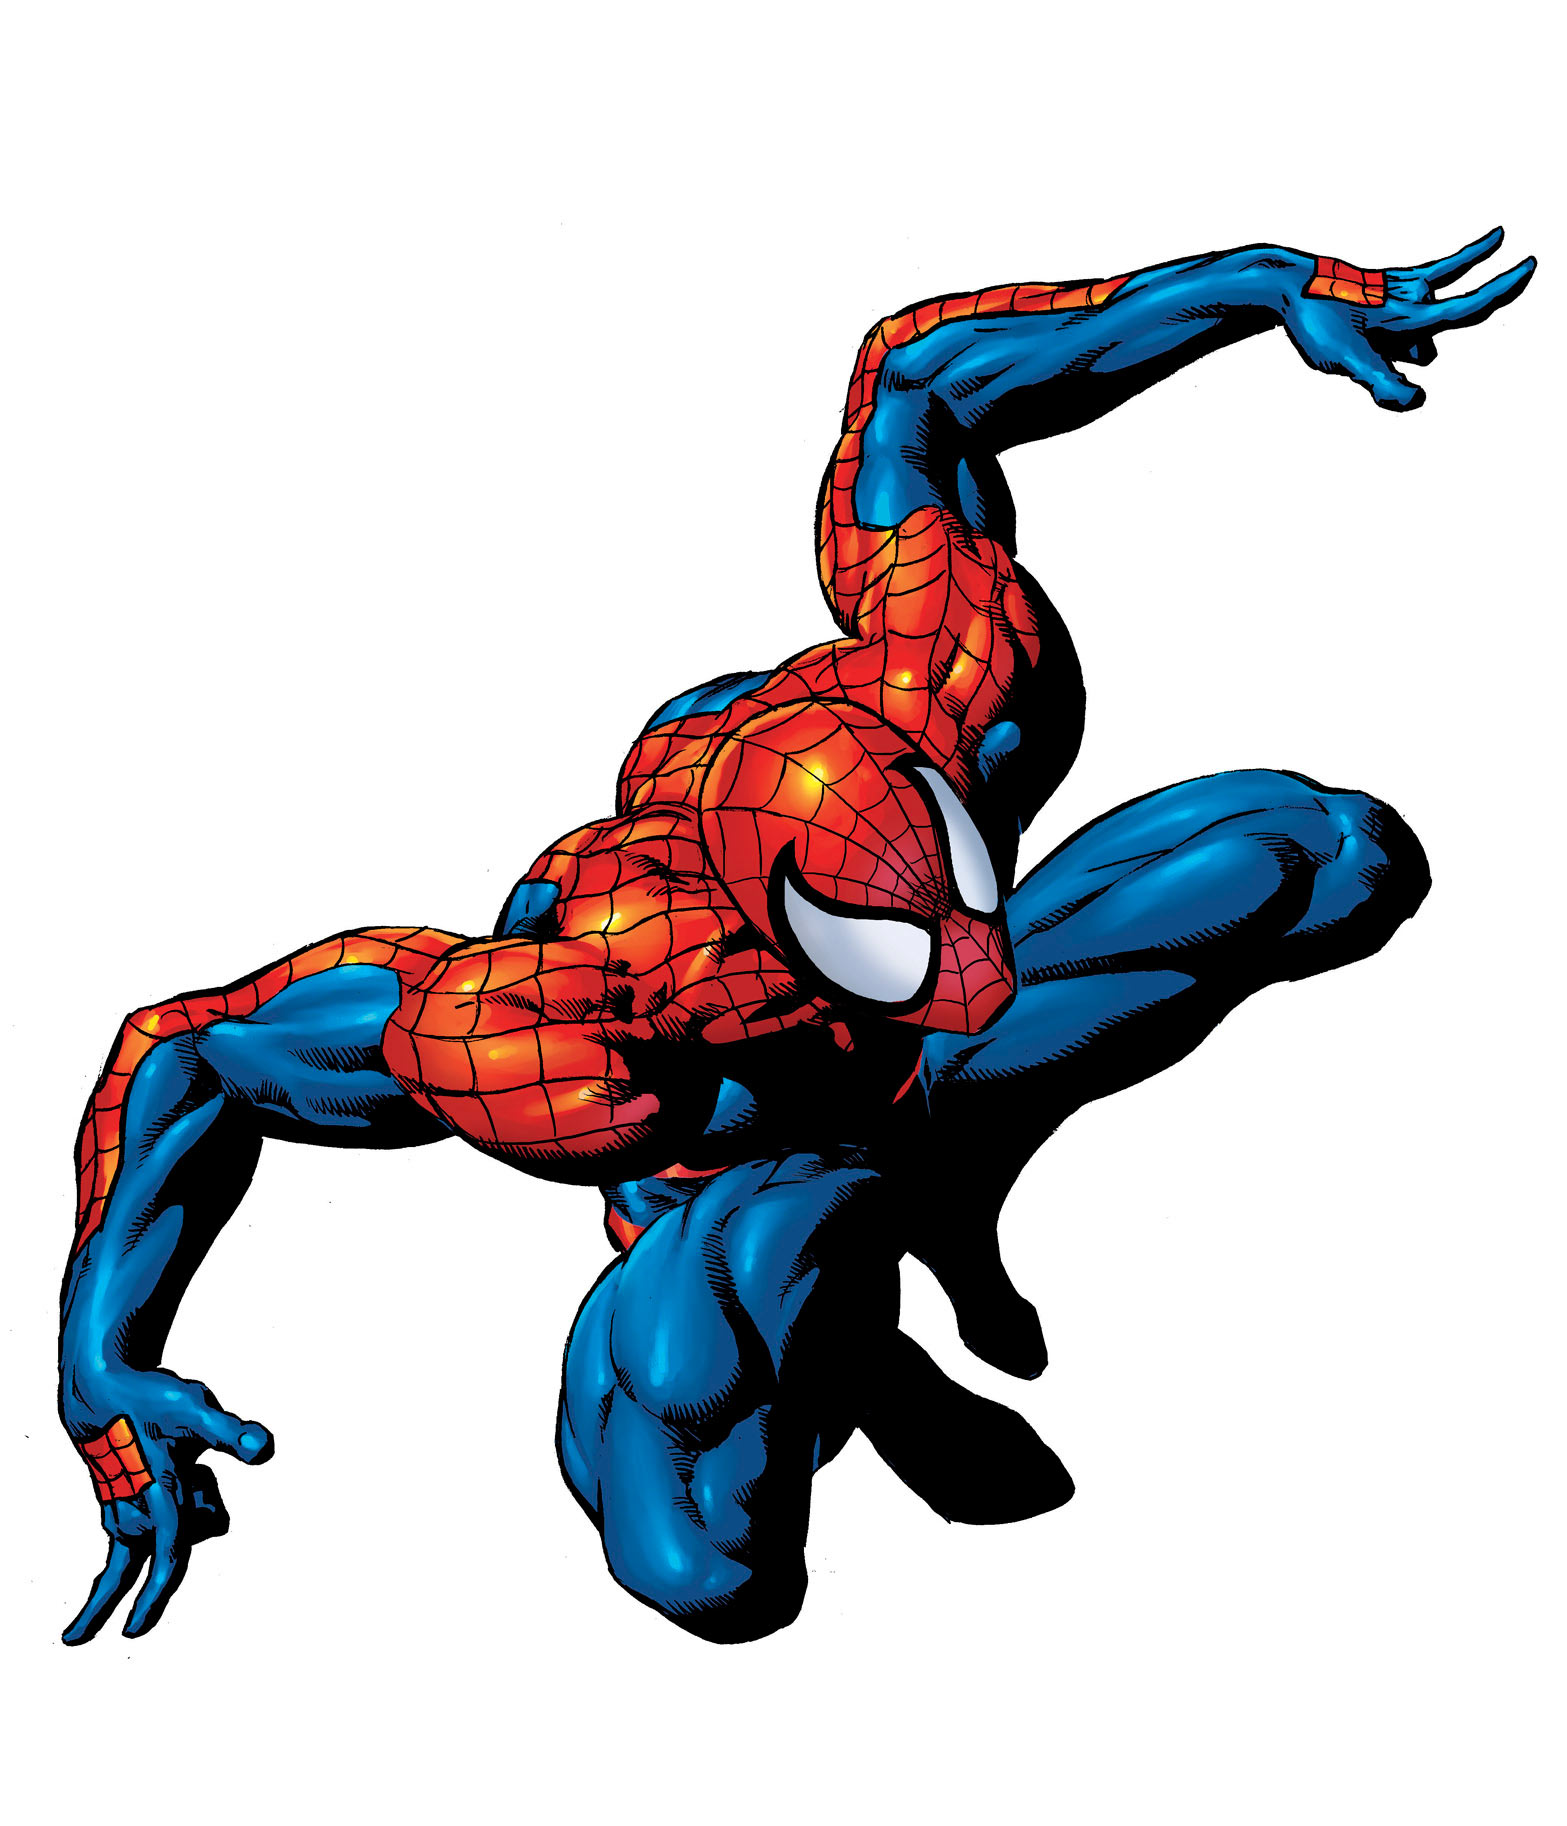 Spider-man by Mike Deodato, Jr.